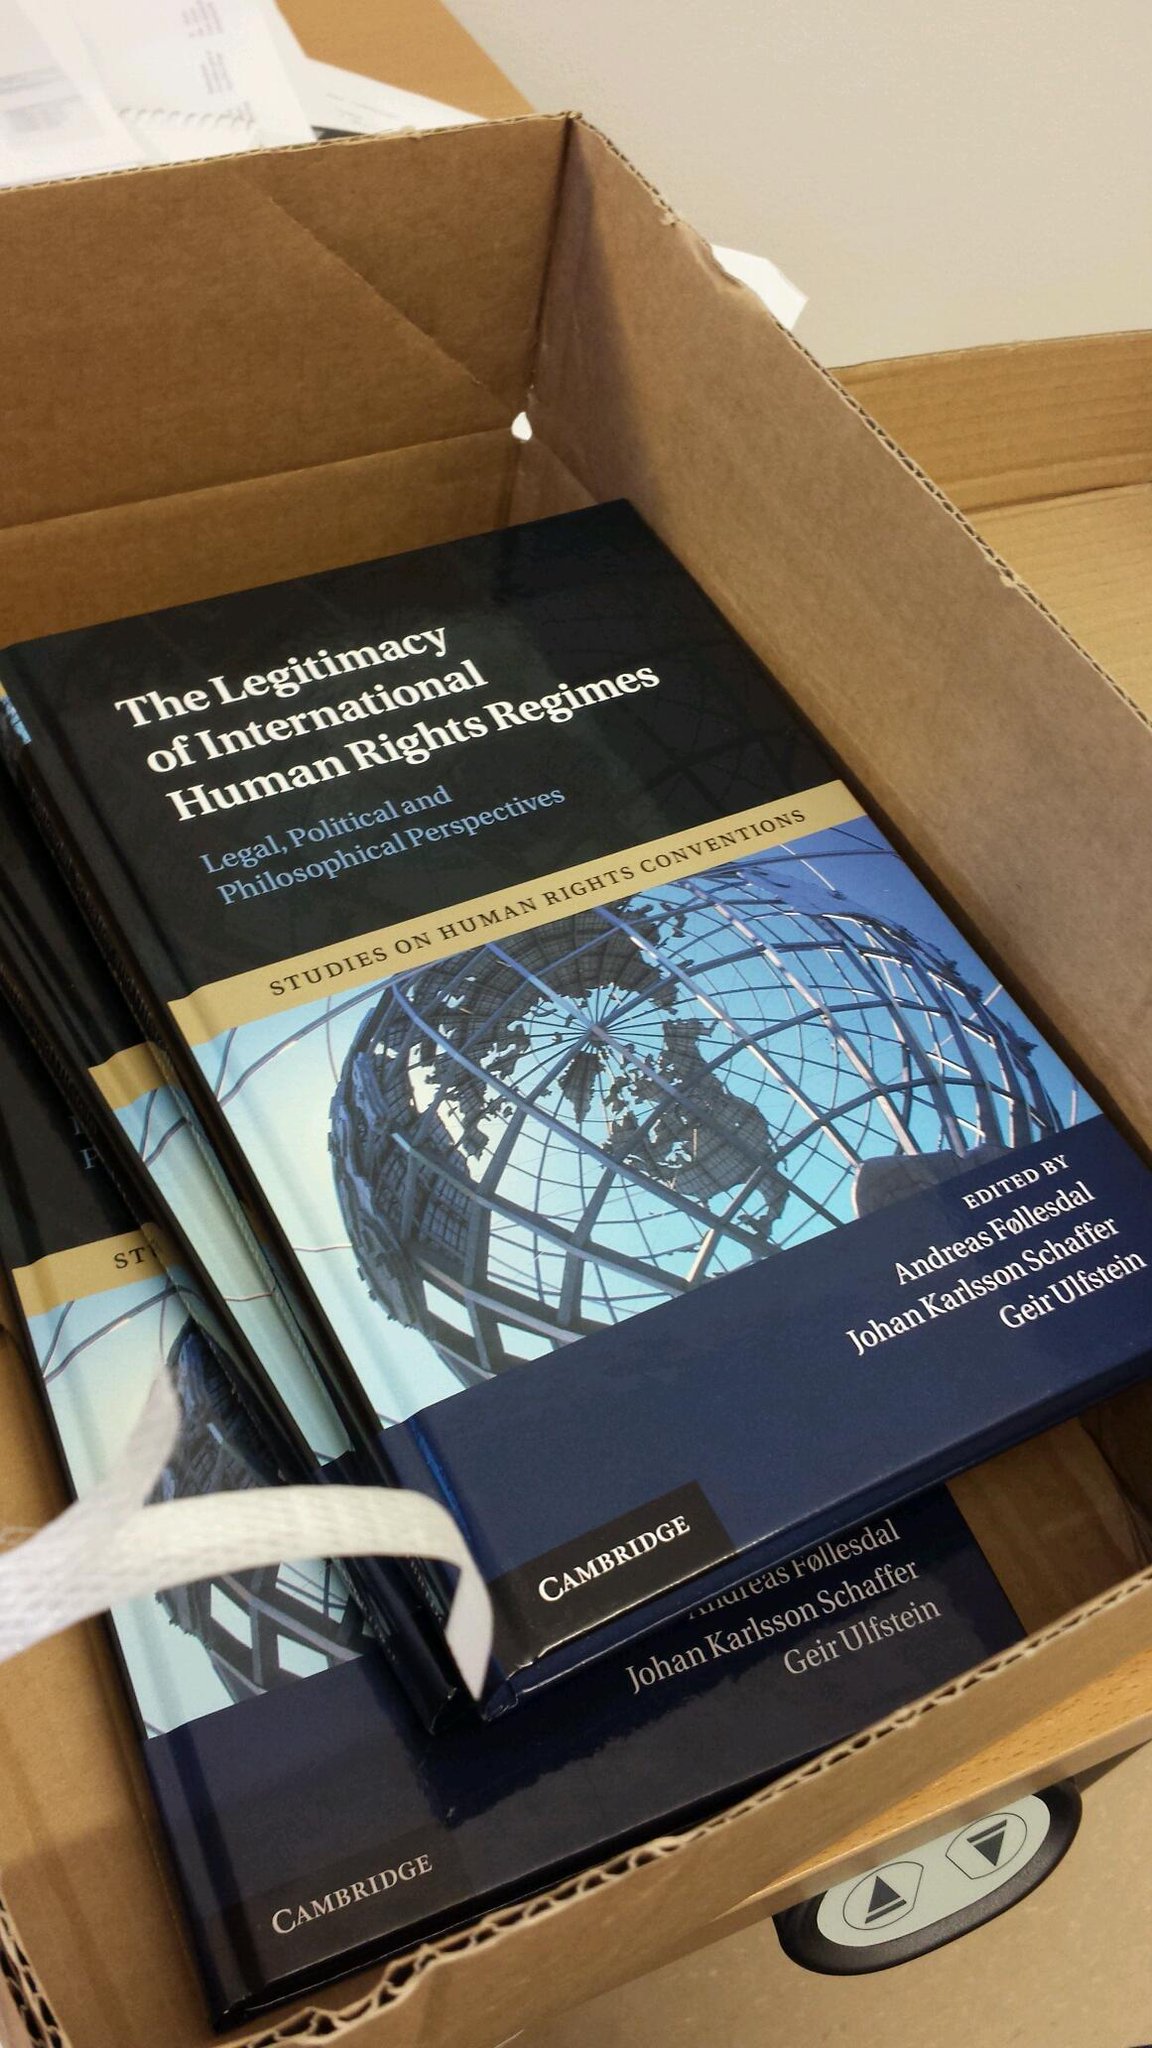 The legitimacy of international human rights regimes: Legal, political and philosophical perspectives